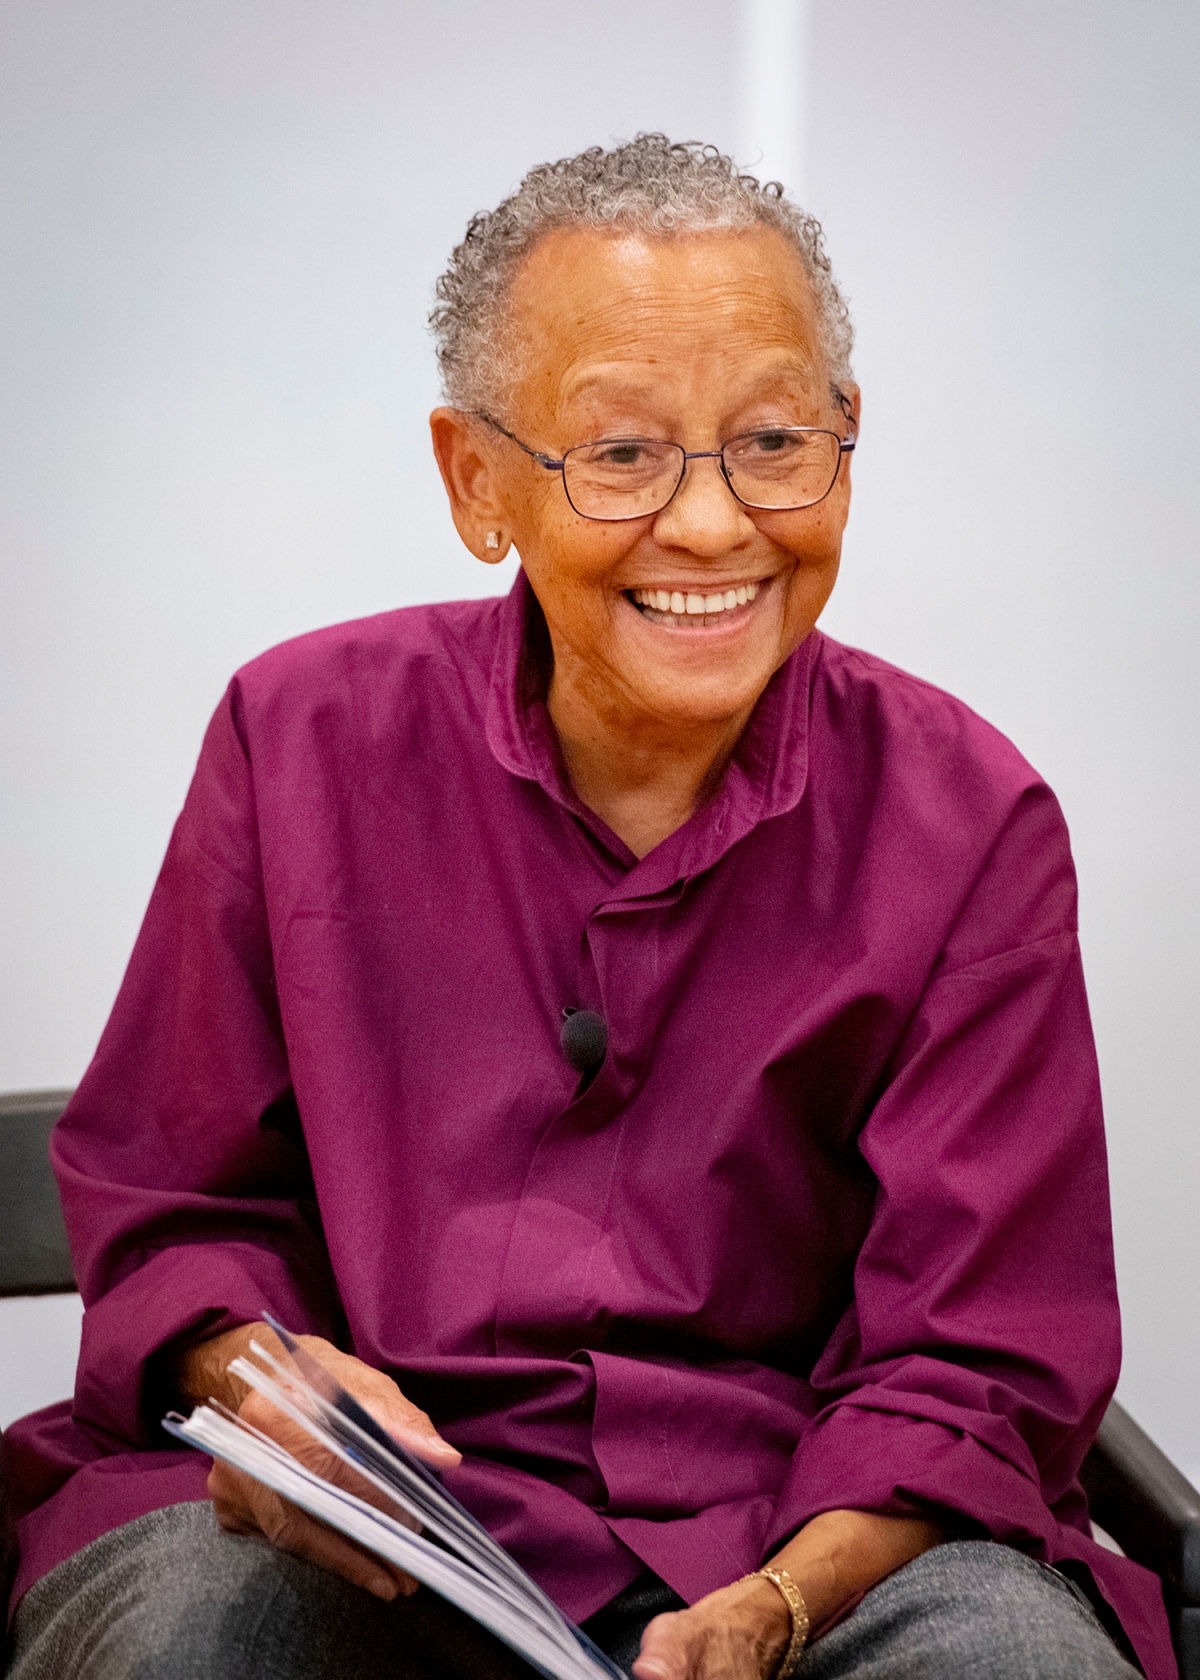 Nikki Giovanni sitting in a chair on stage smiling with a book in her lap